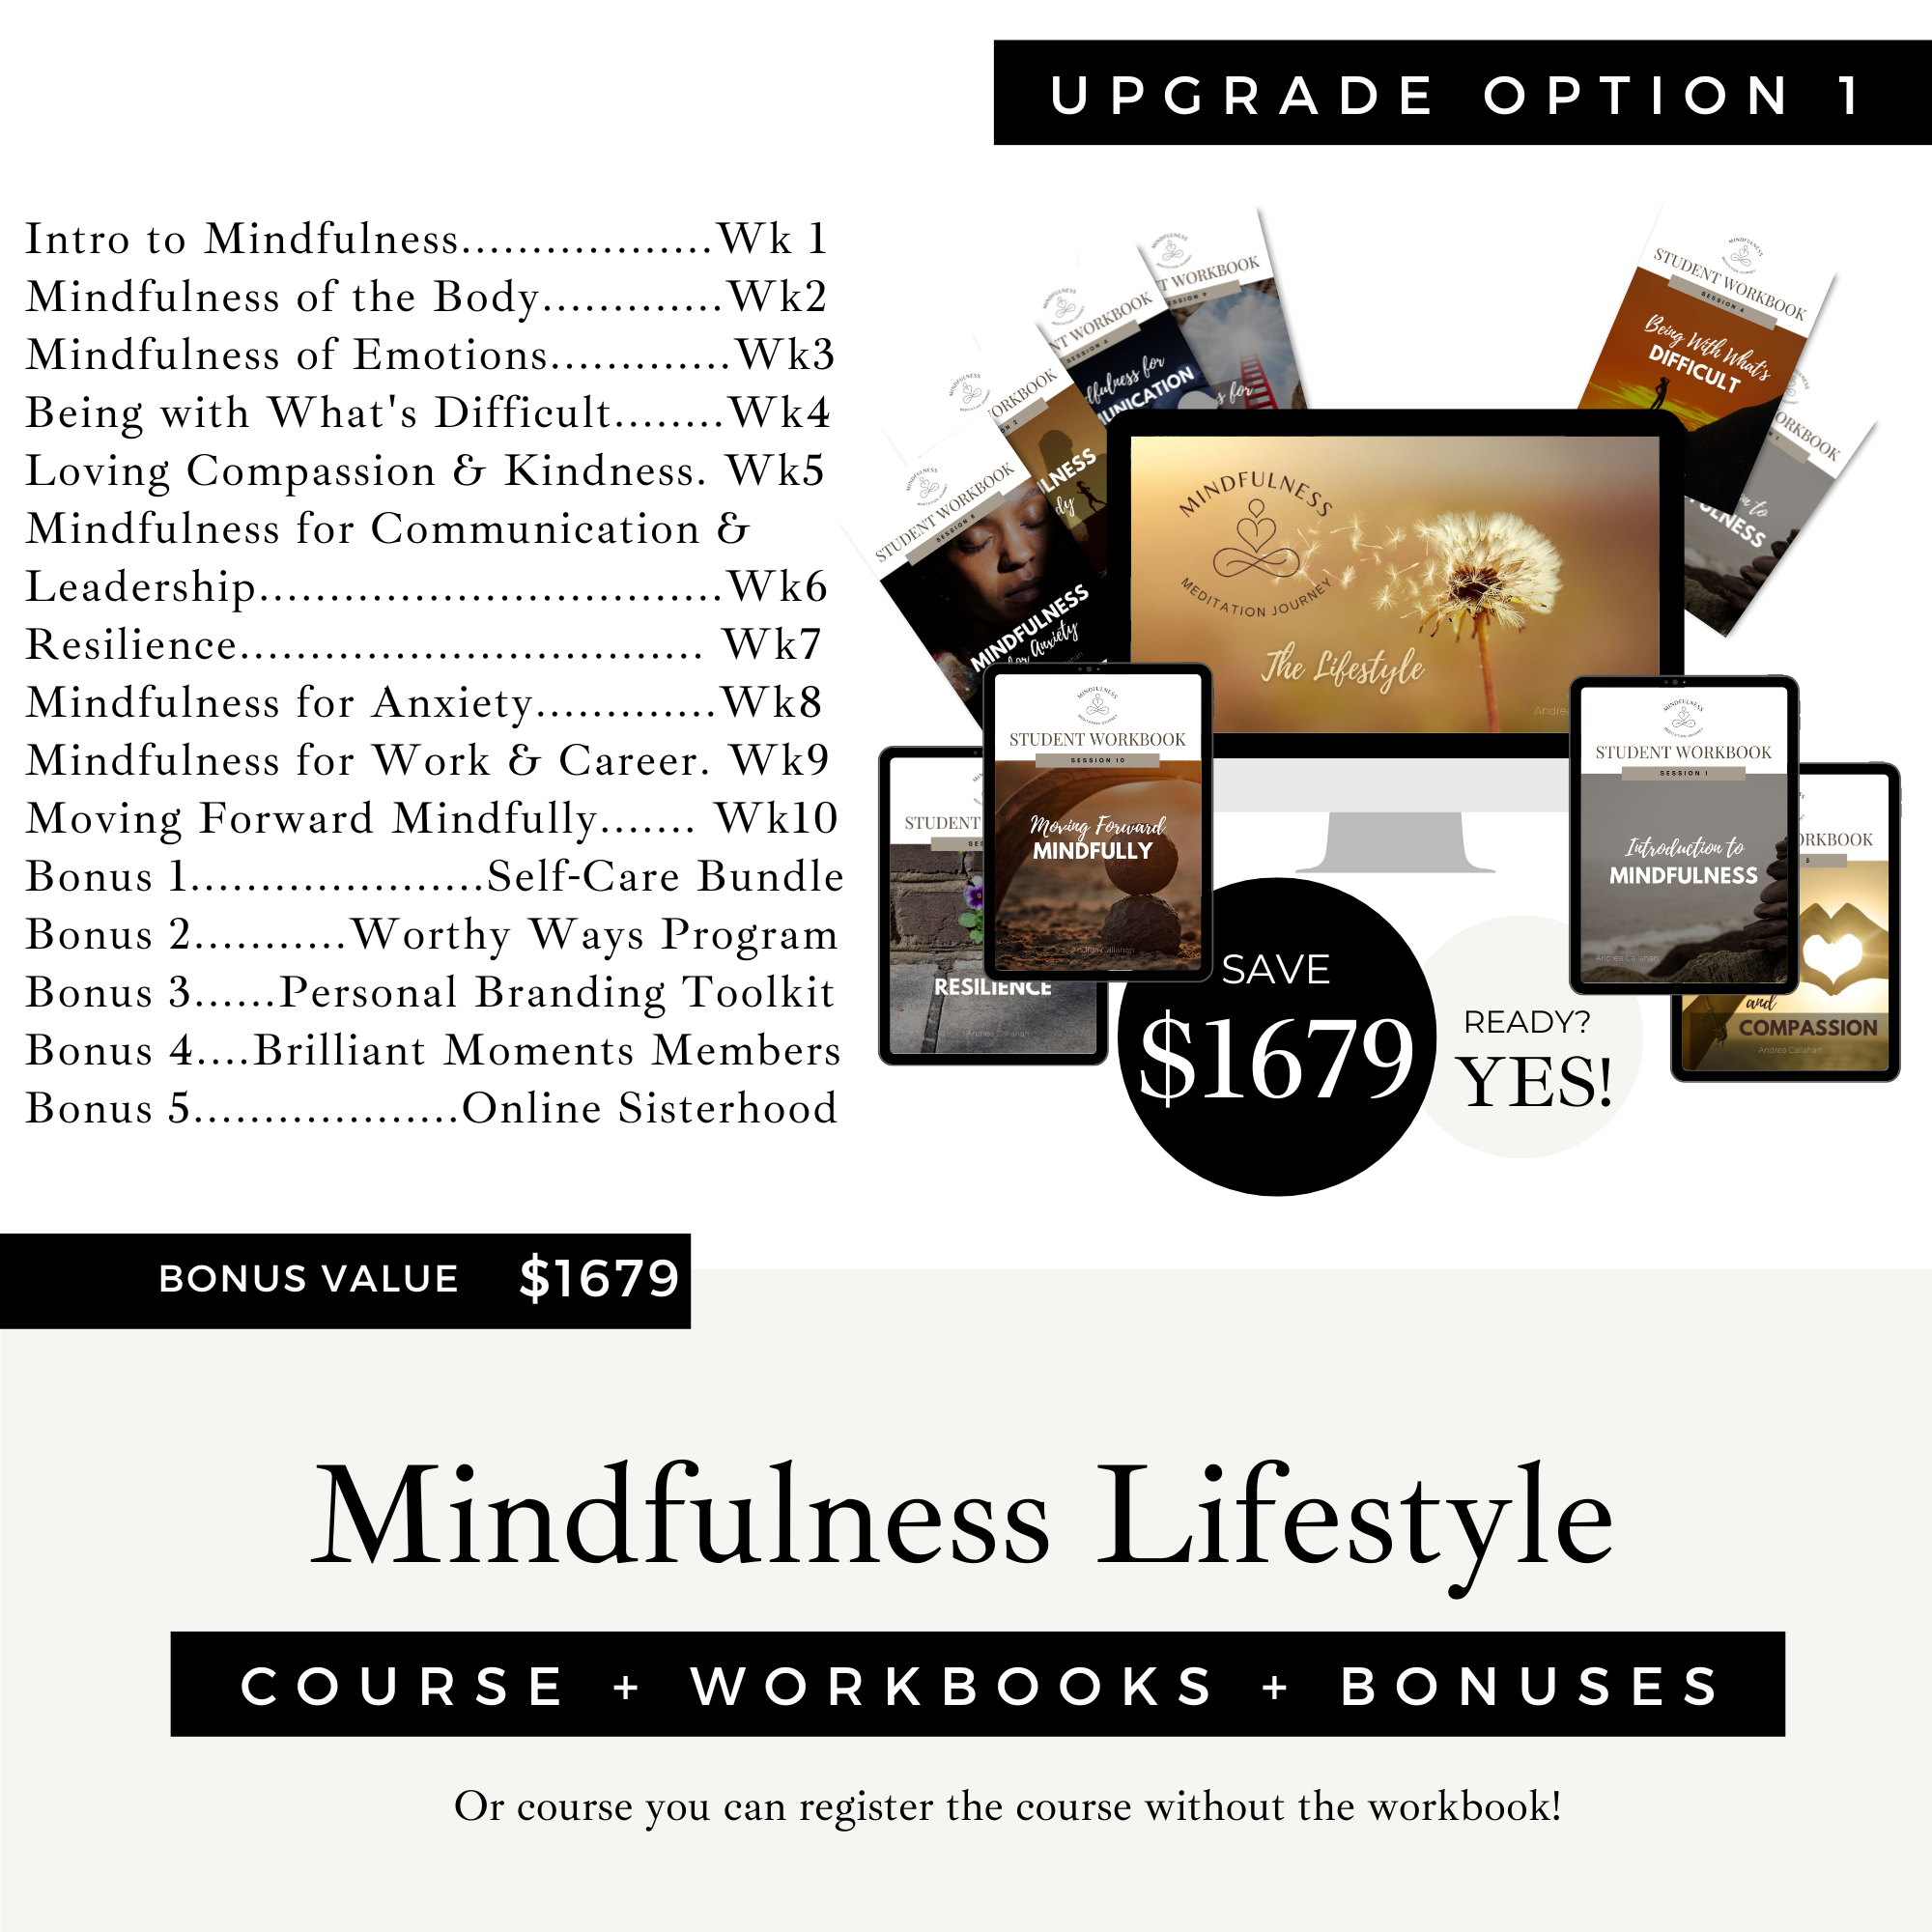 The Mindfulness Lifestyle Option 1 with Andrea Callahan